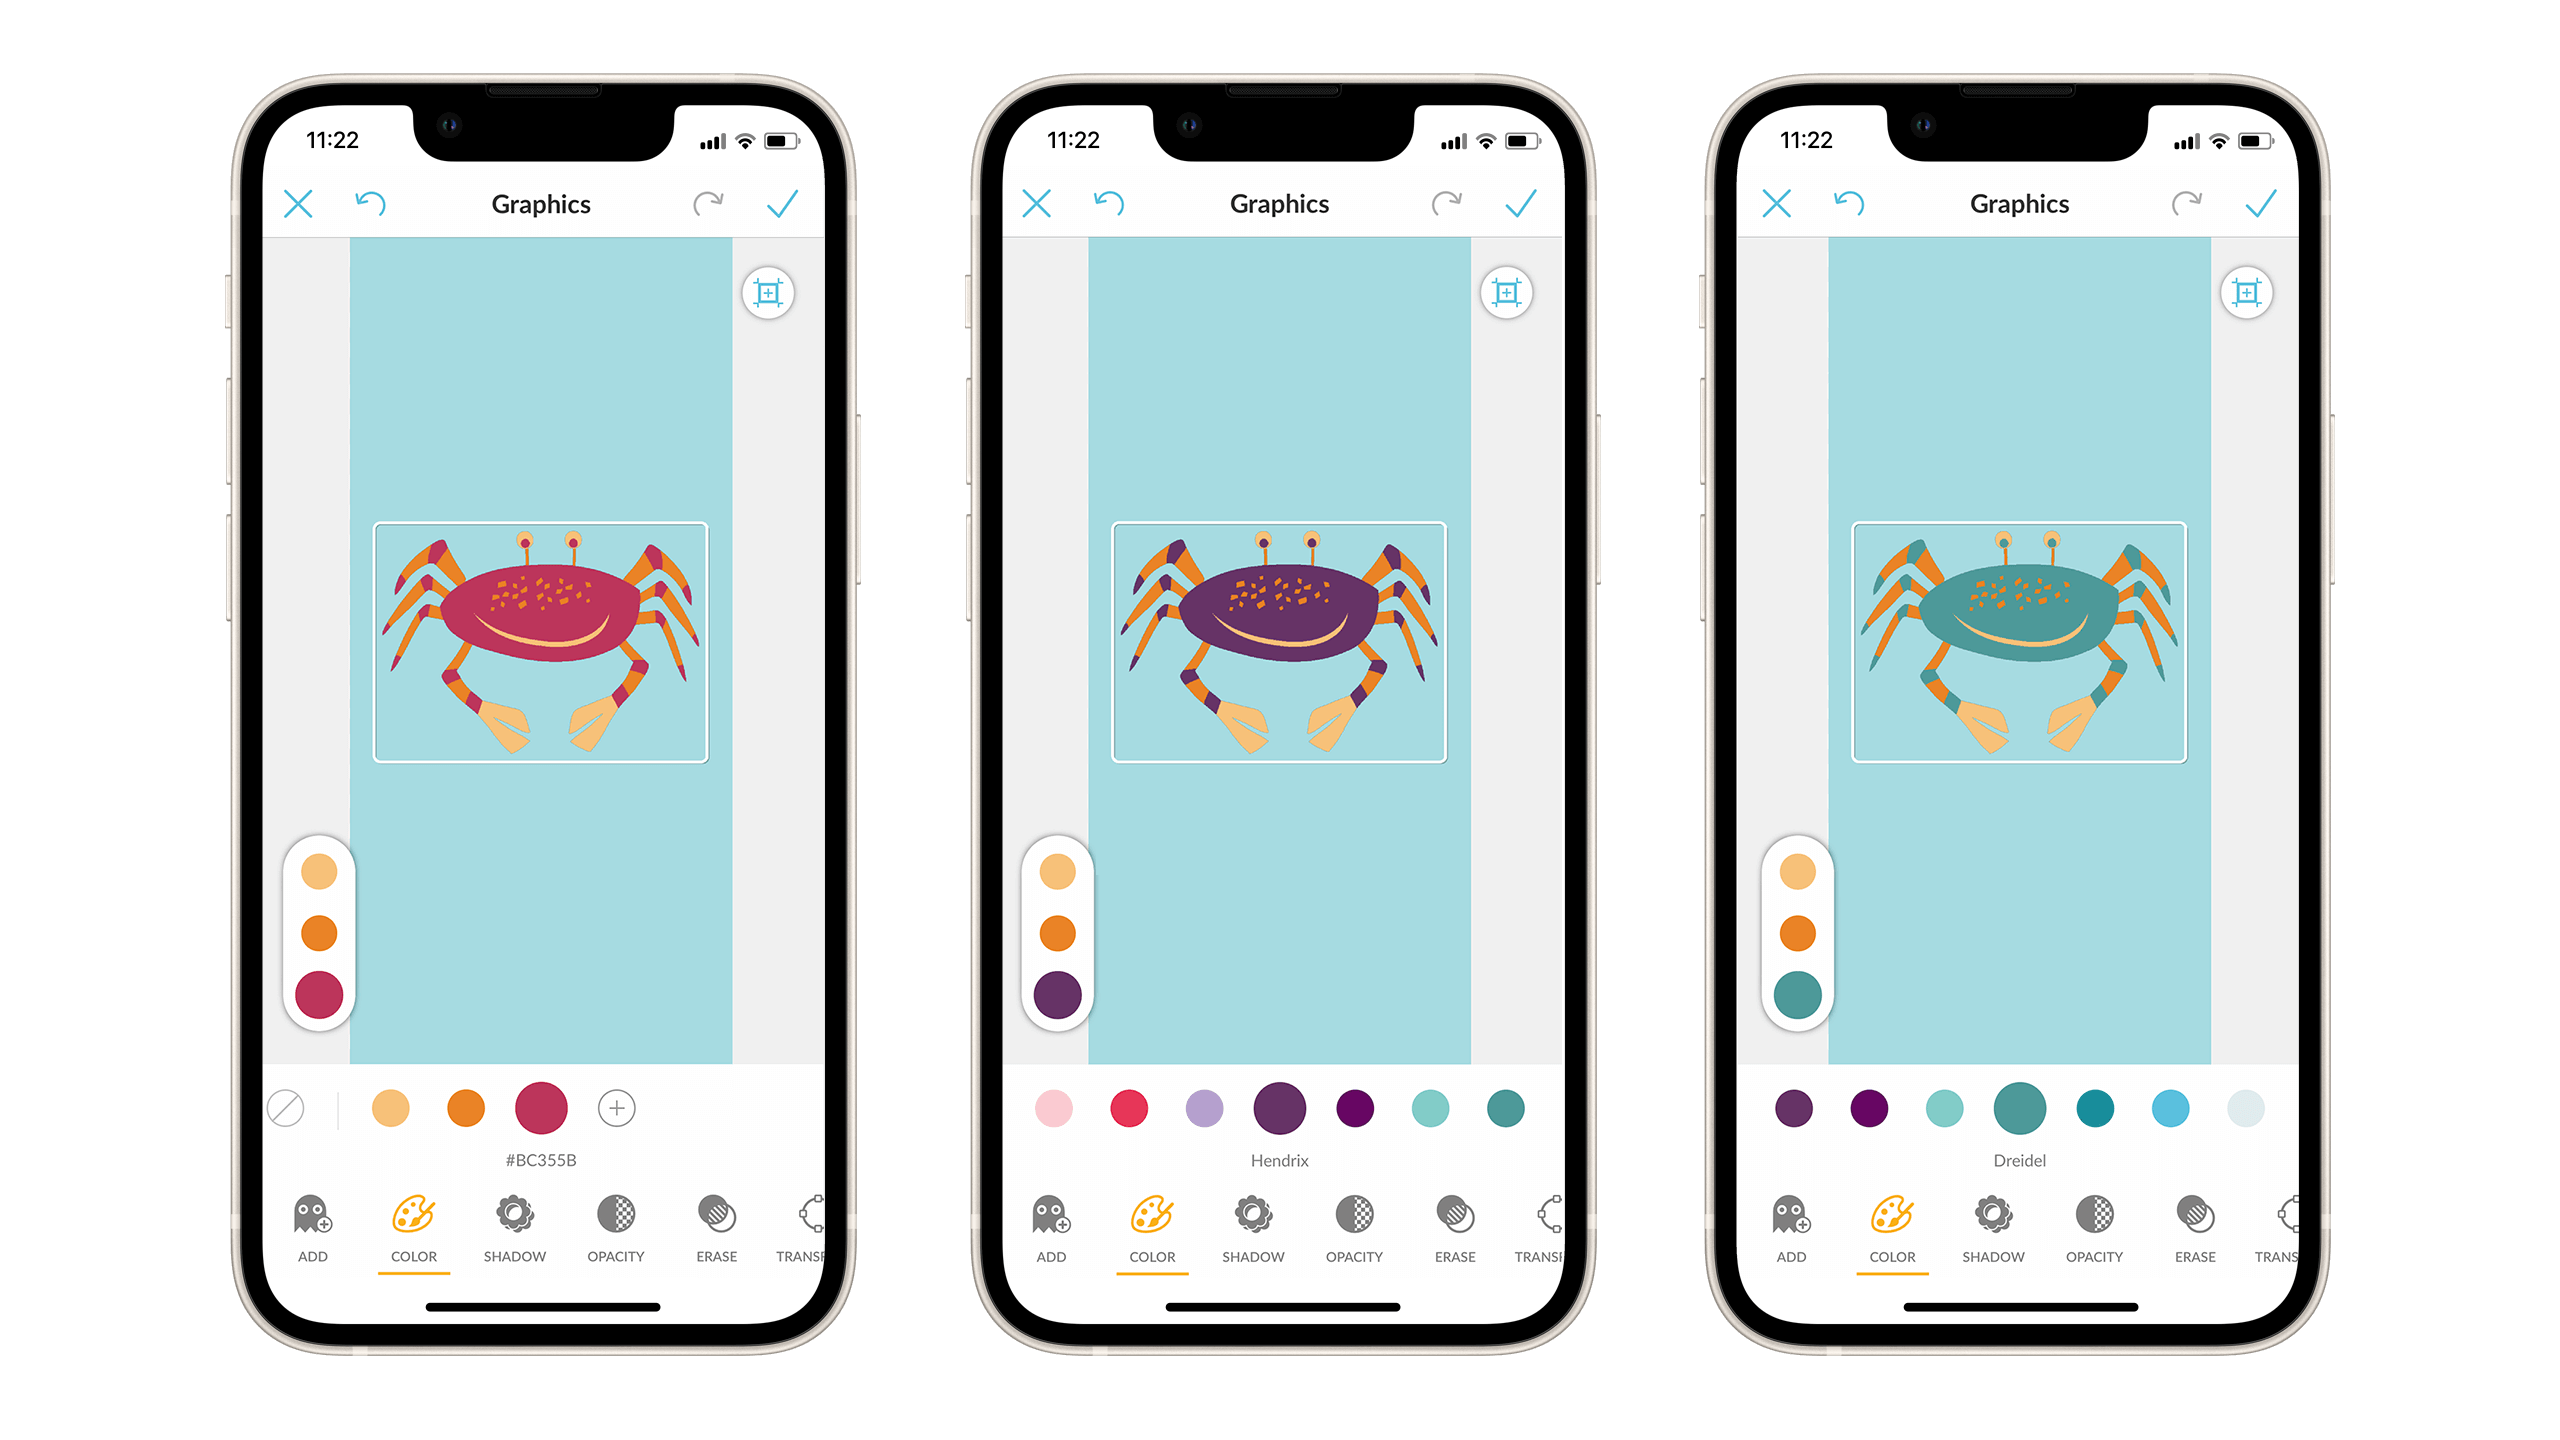 Three iPhones with each with an illustration of a crab. The user interface allows you to change the colors and each crab has a different color shell.